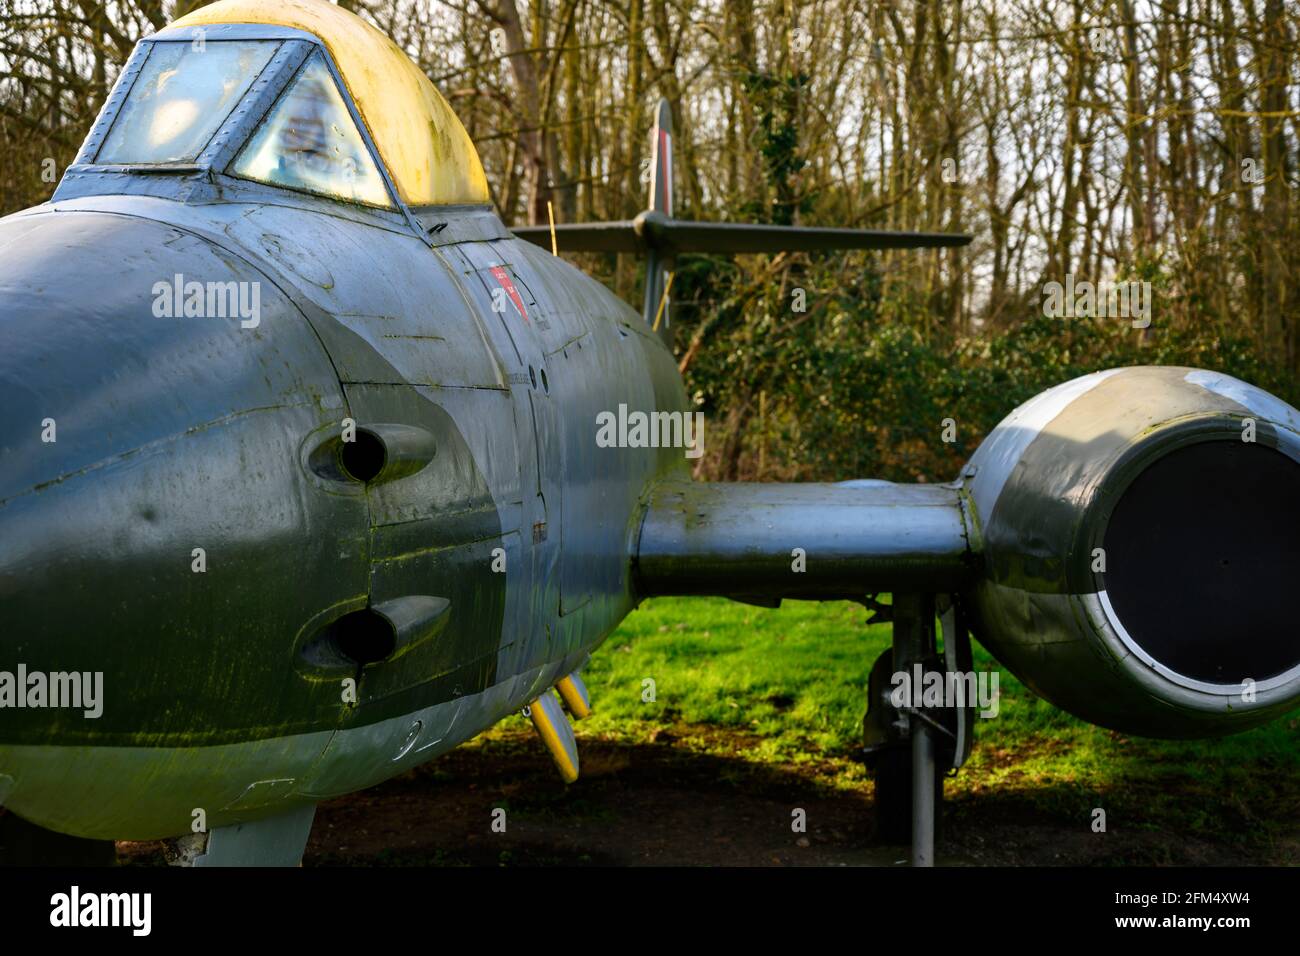 Gloster Meteor Cold War era military jet fighter Stock Photo